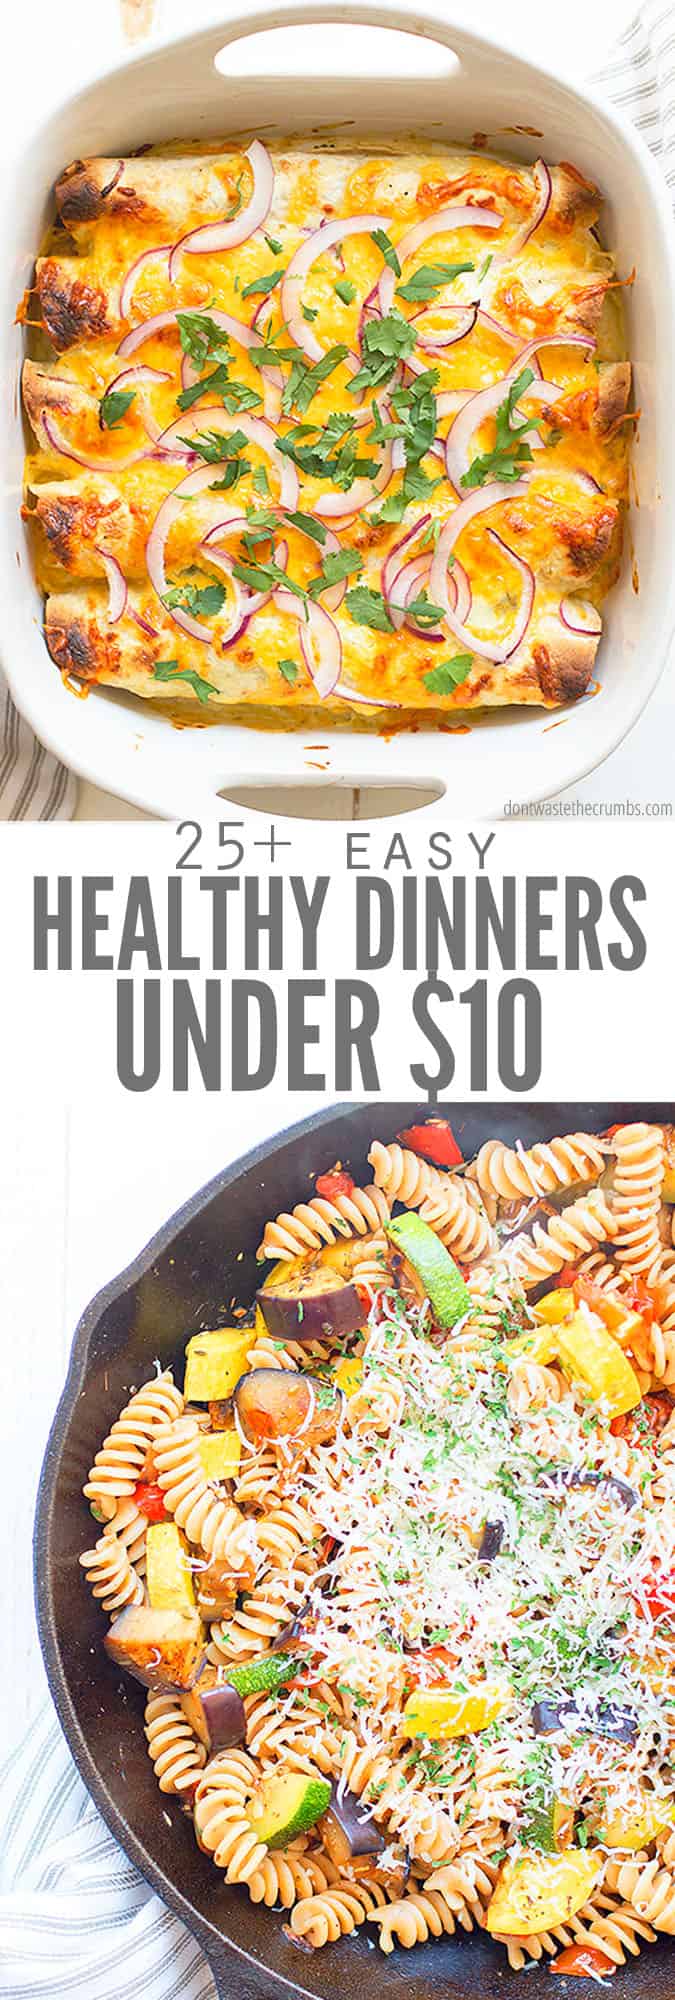 25+ Cheap Healthy Meals (for under $10) - Don't Waste the Crumbs